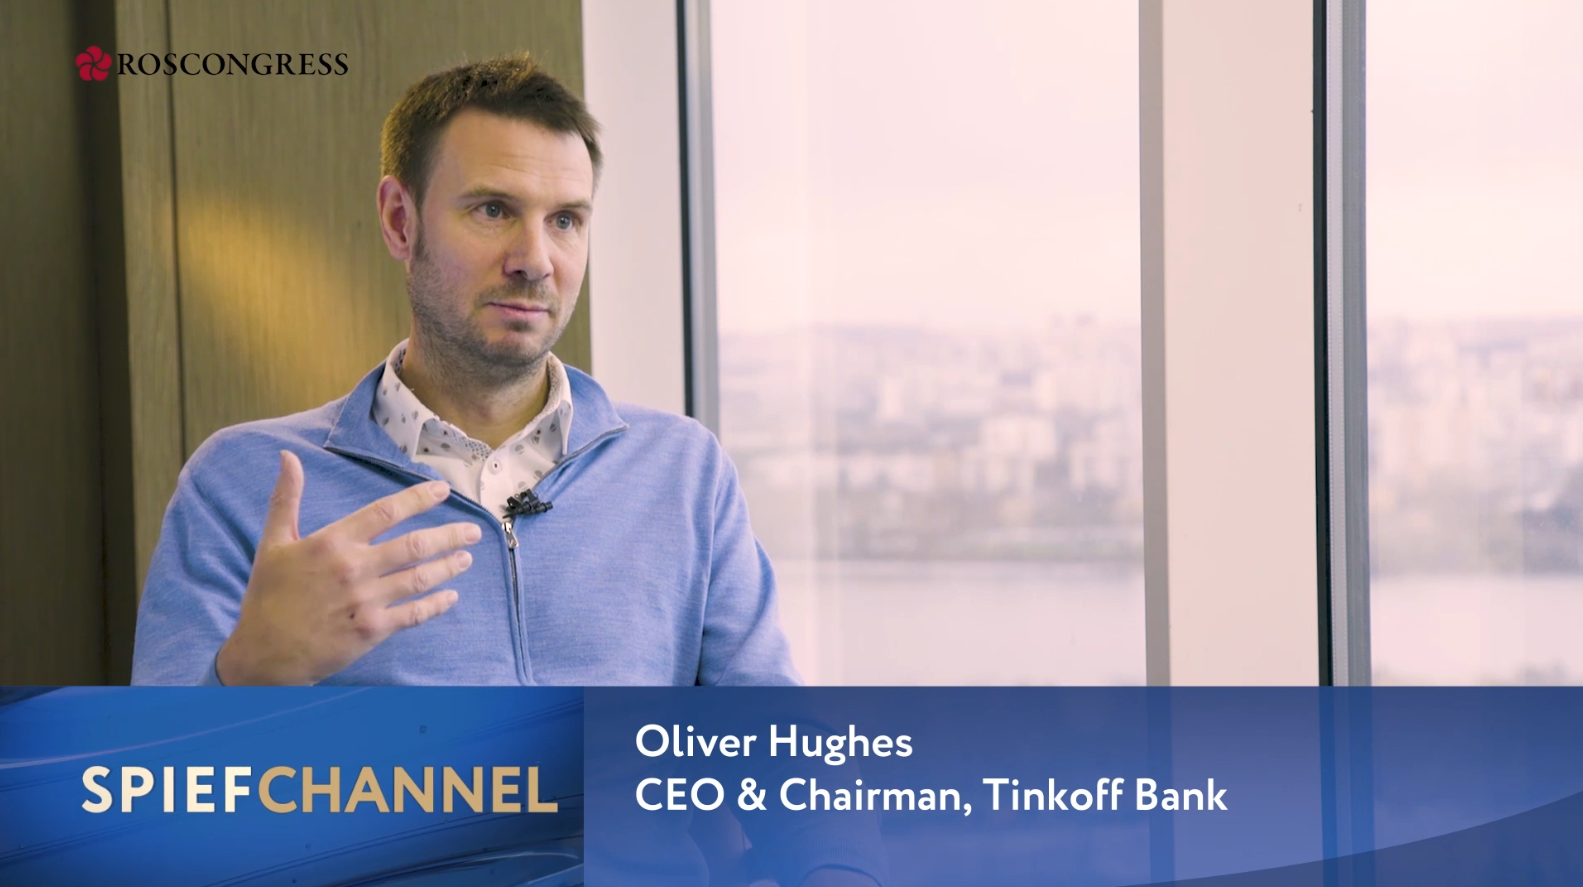 Oliver Hughes, CEO, Tinkoff Bank